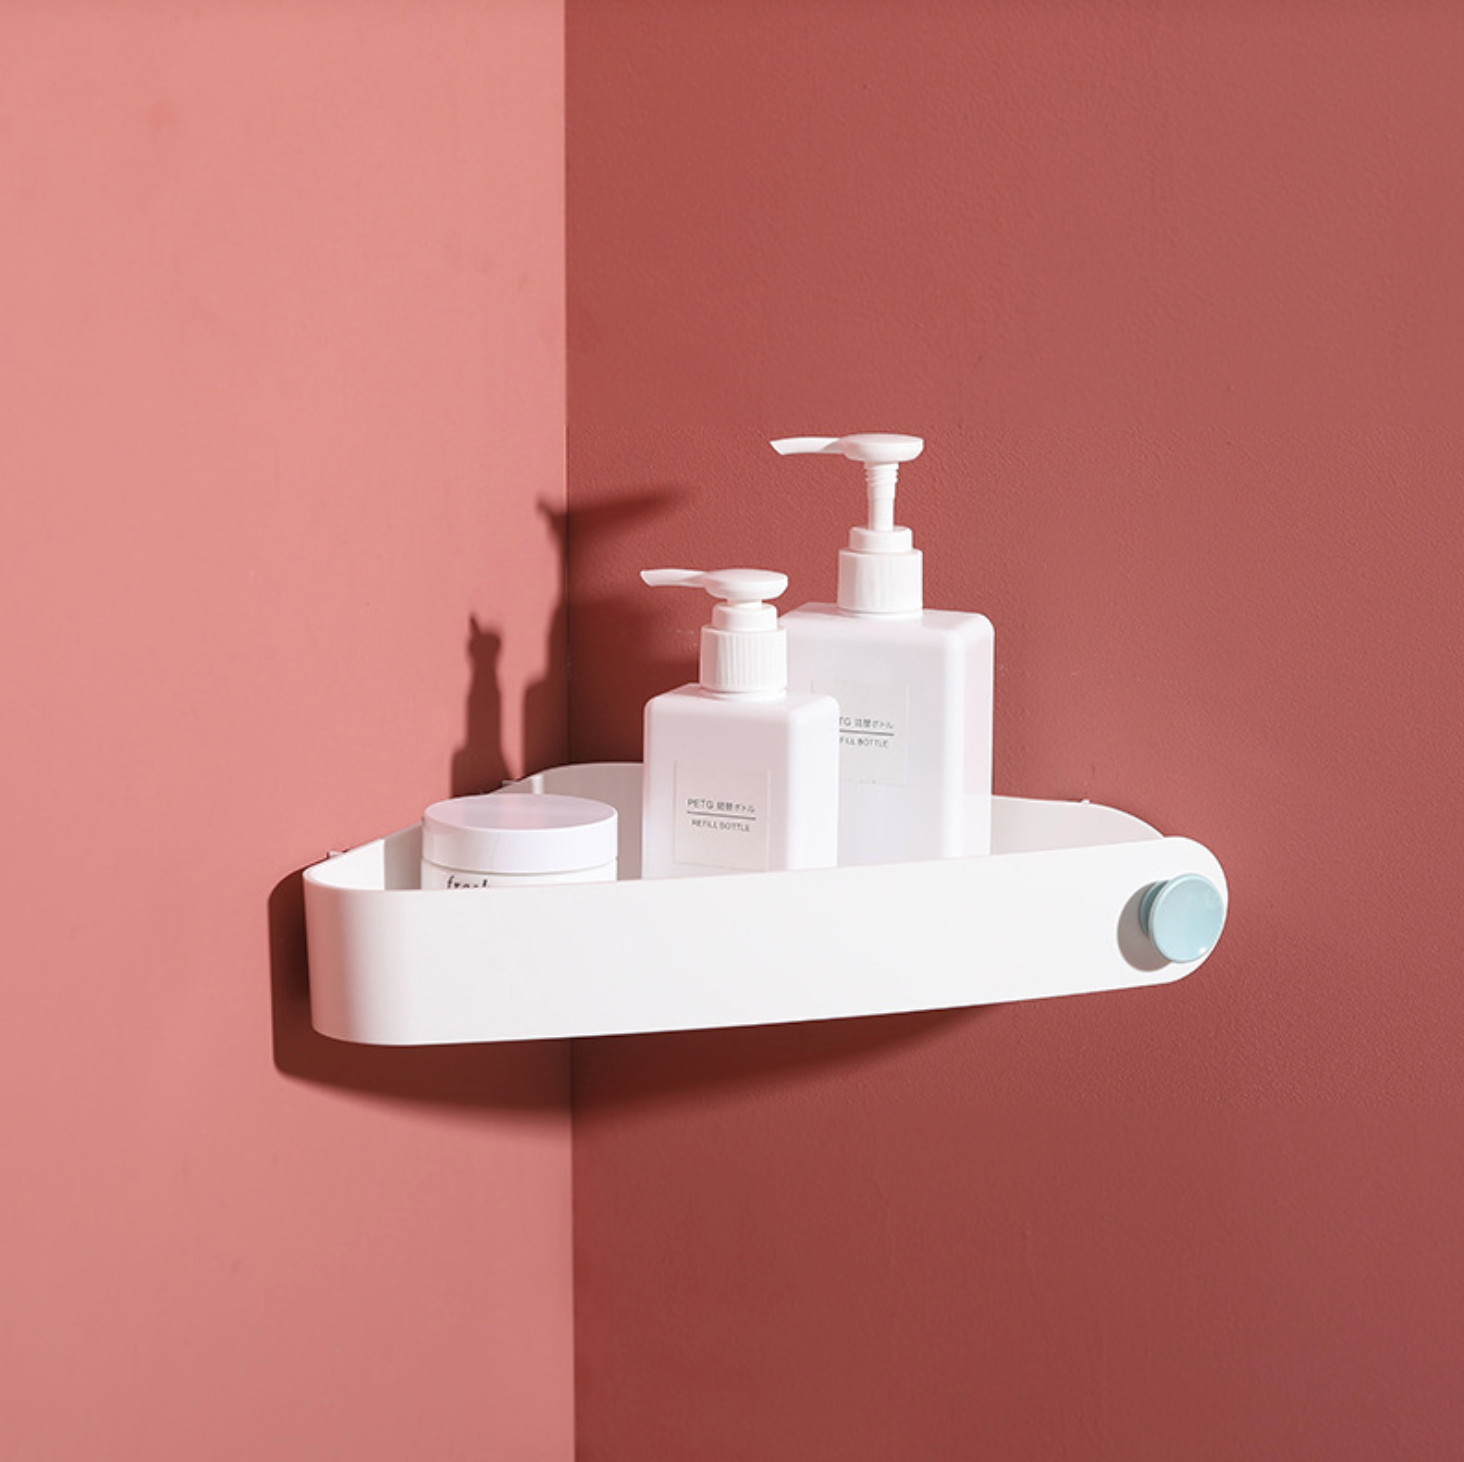 Punch-free bathroom wall-mounted triangle storage rack - The Feelter